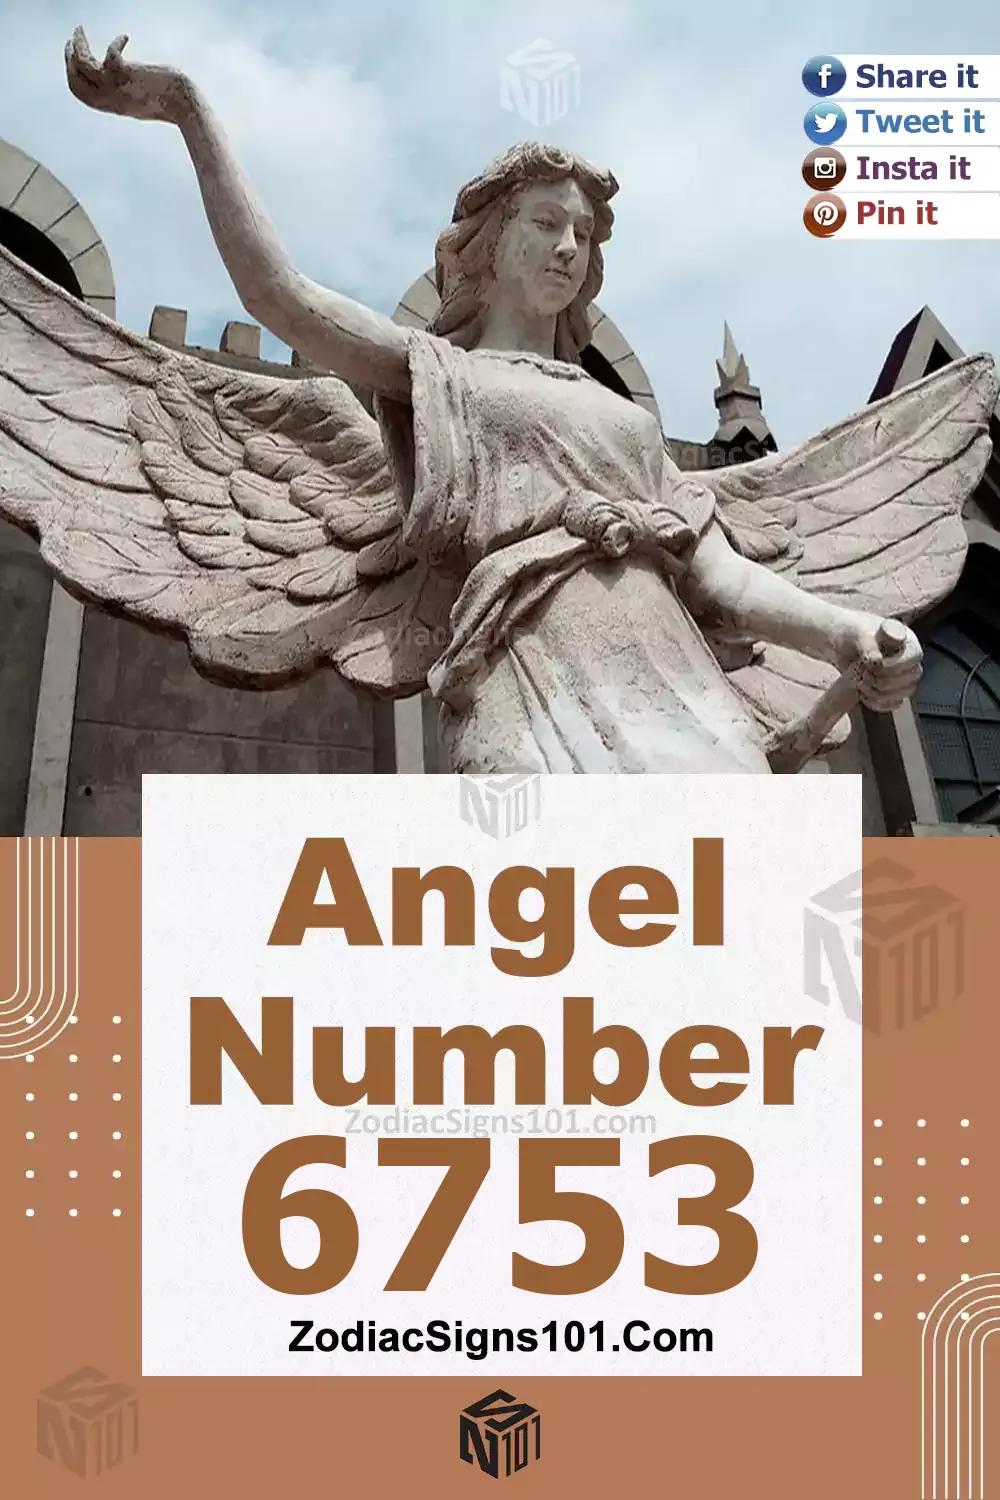 6753 Angel Number Meaning